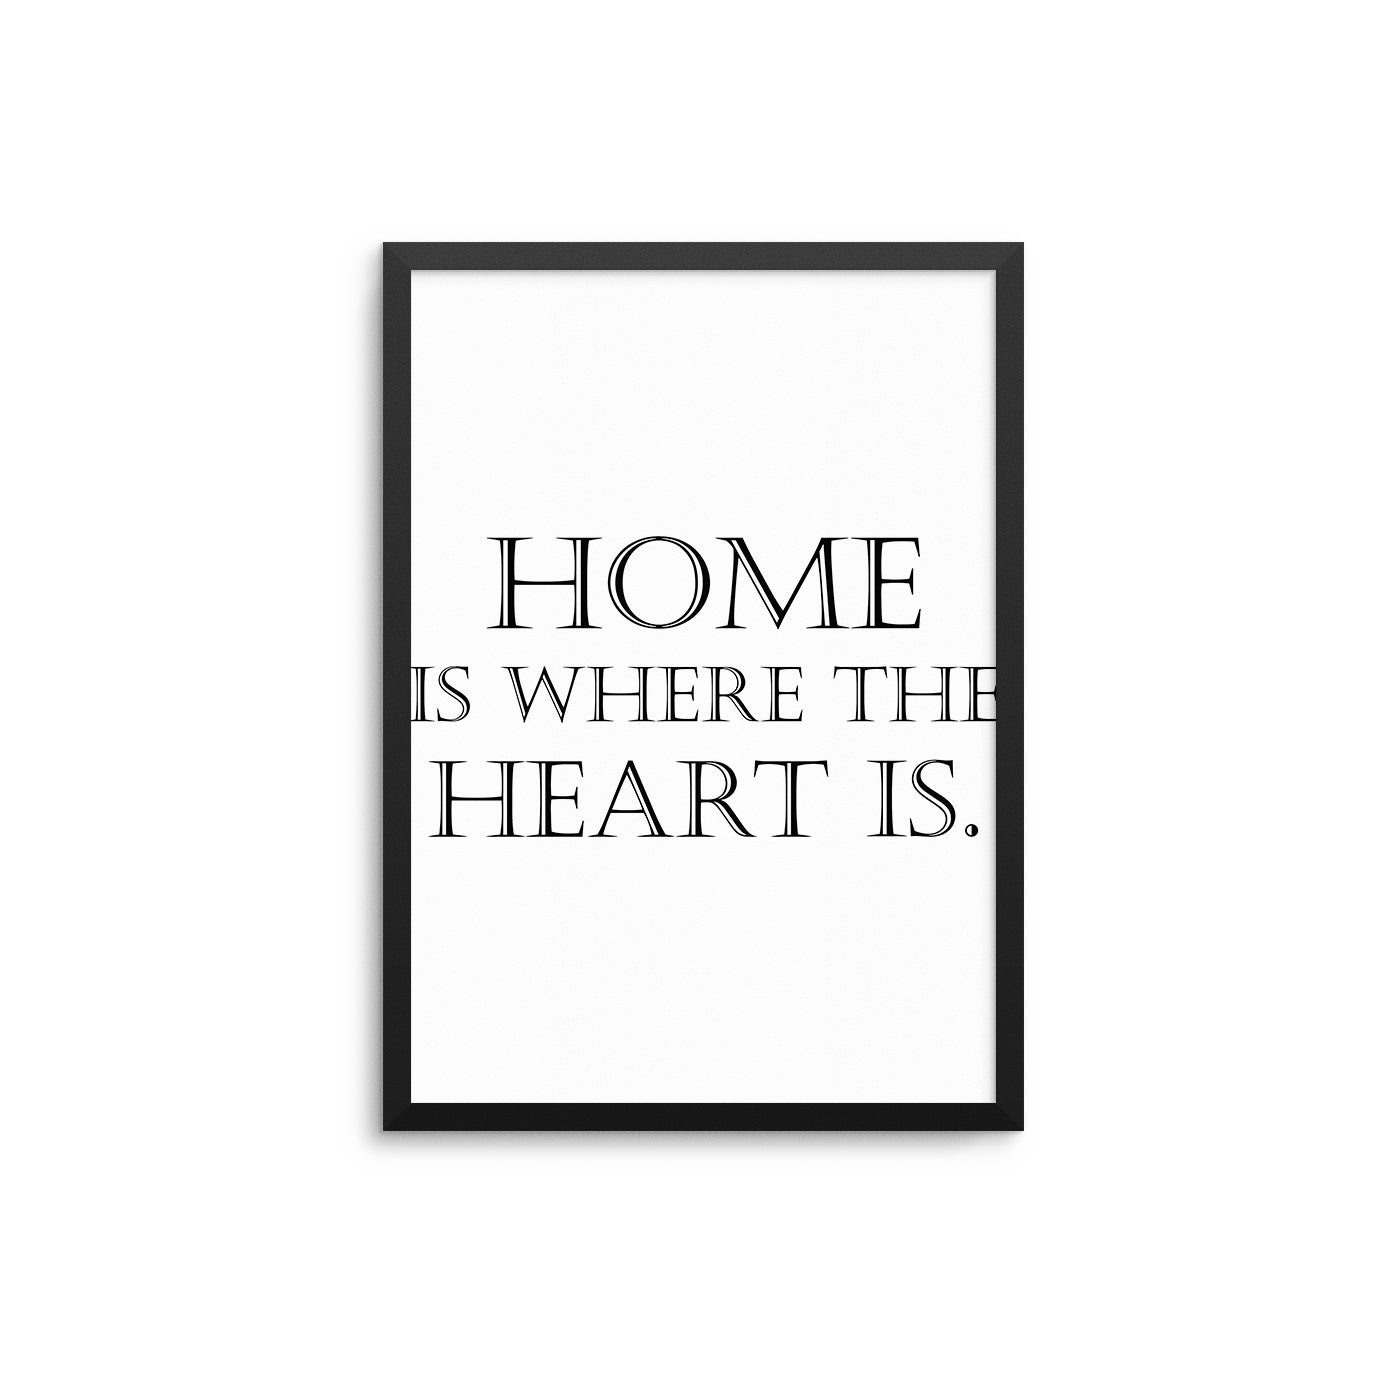 Home Is Where The Heart Is - D'Luxe Prints